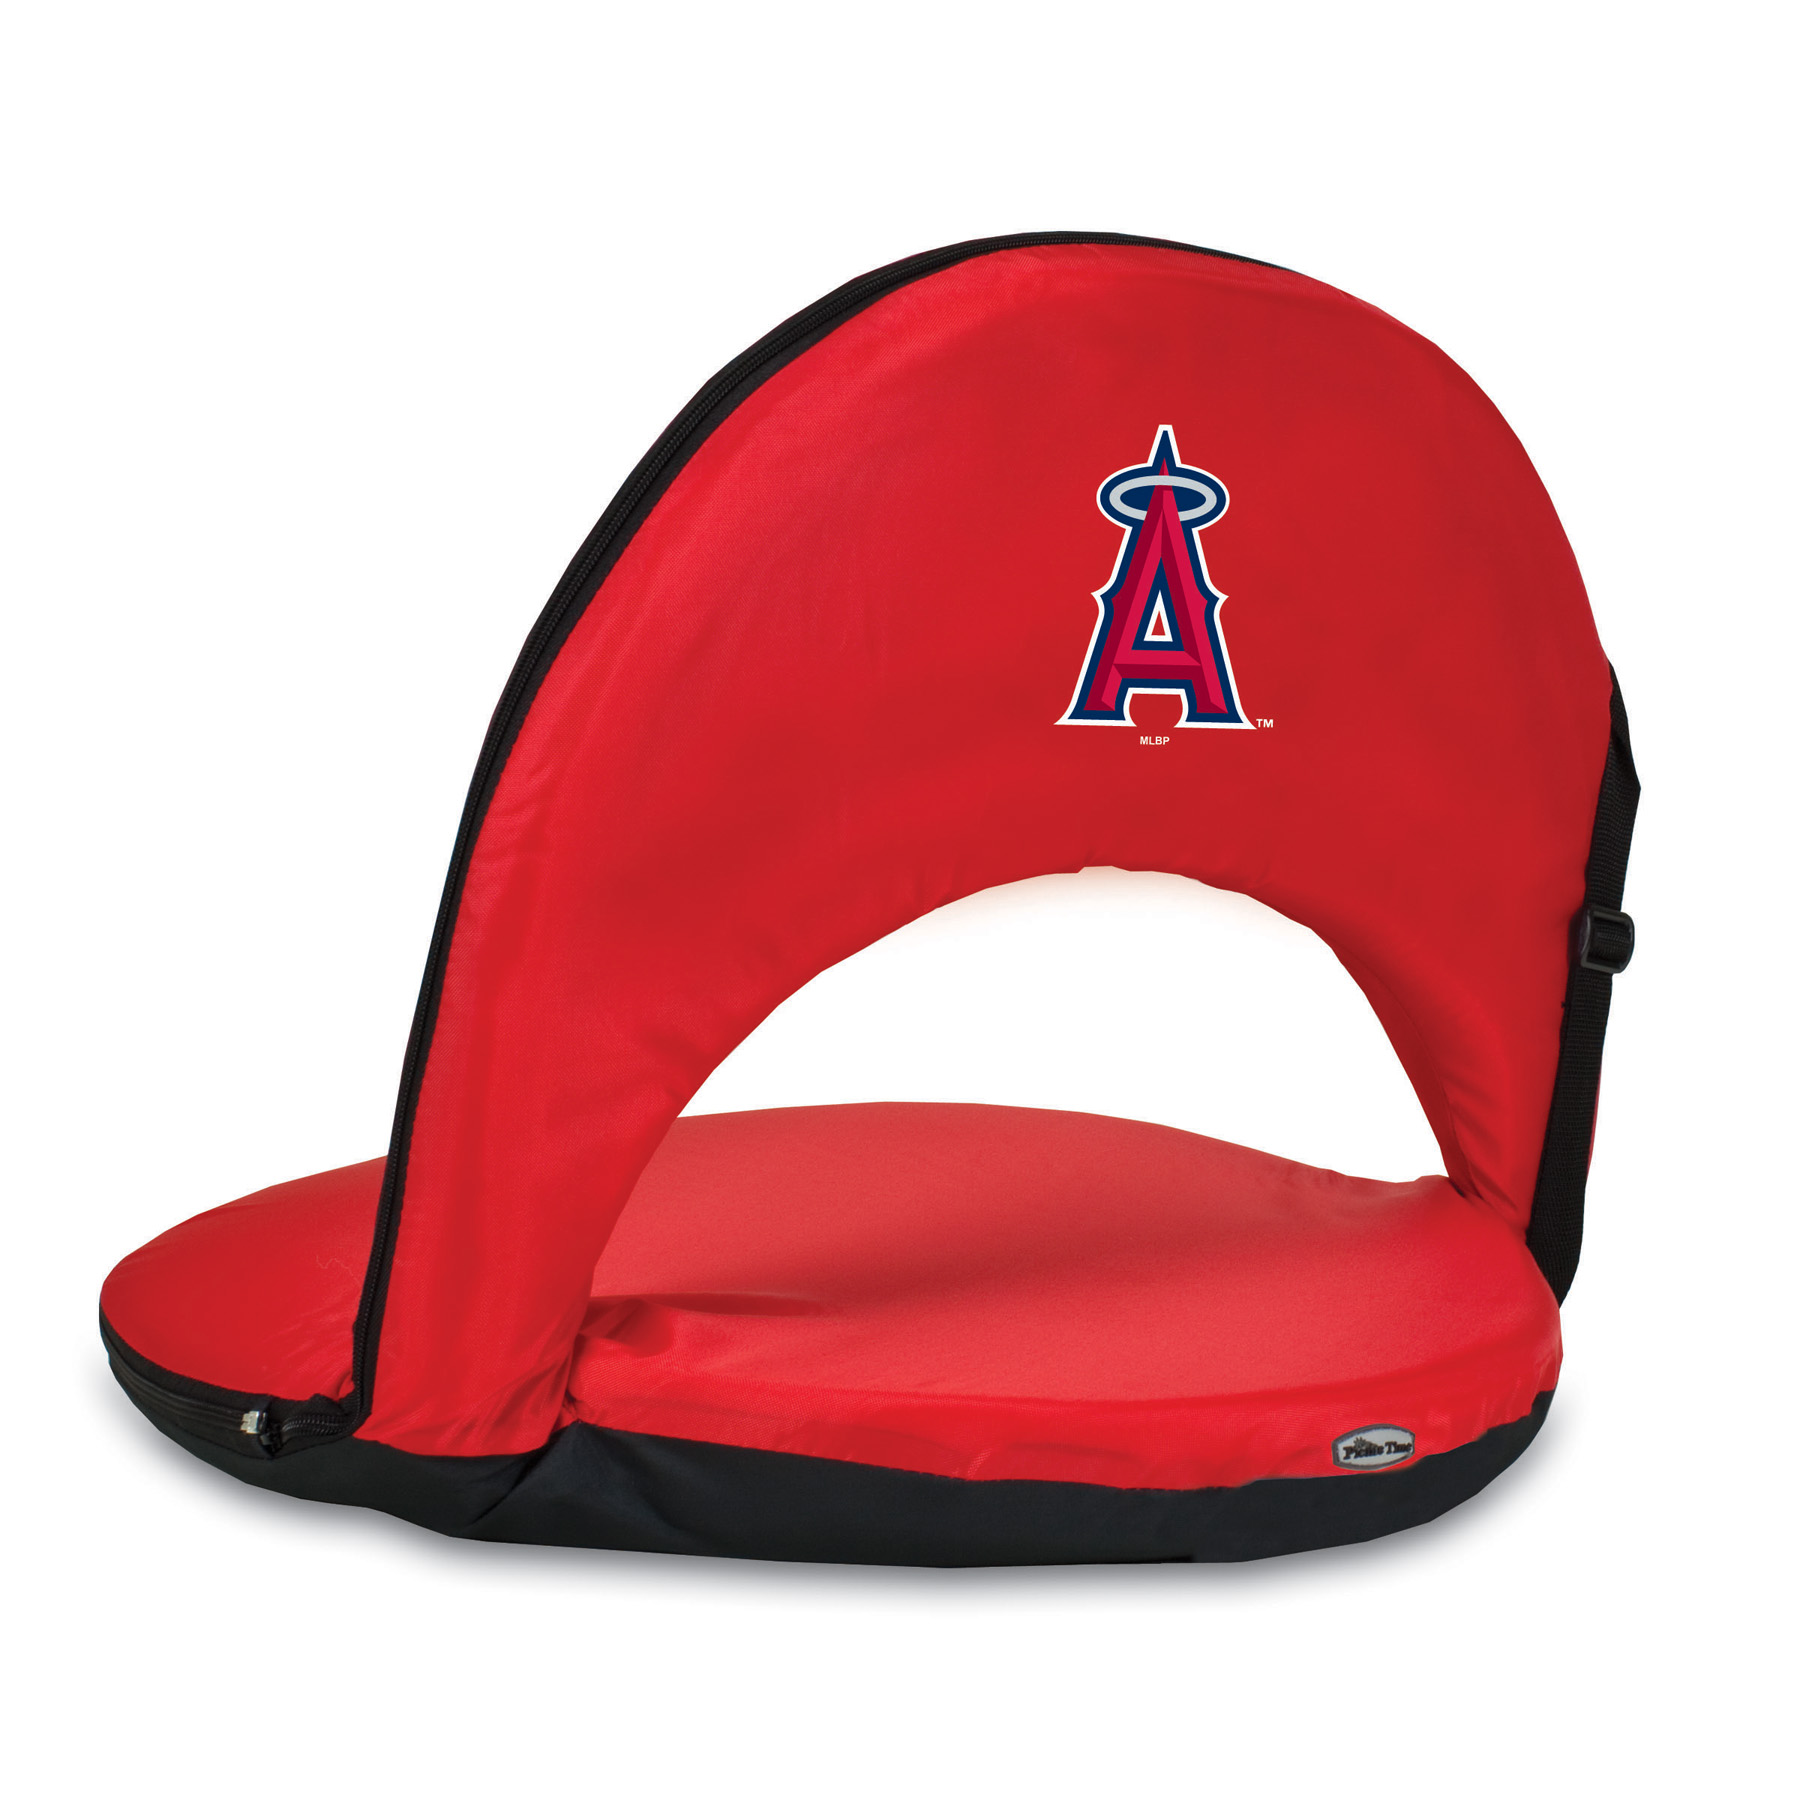 Picnic Time Los Angeles Angels Oniva Portable Reclining Seat